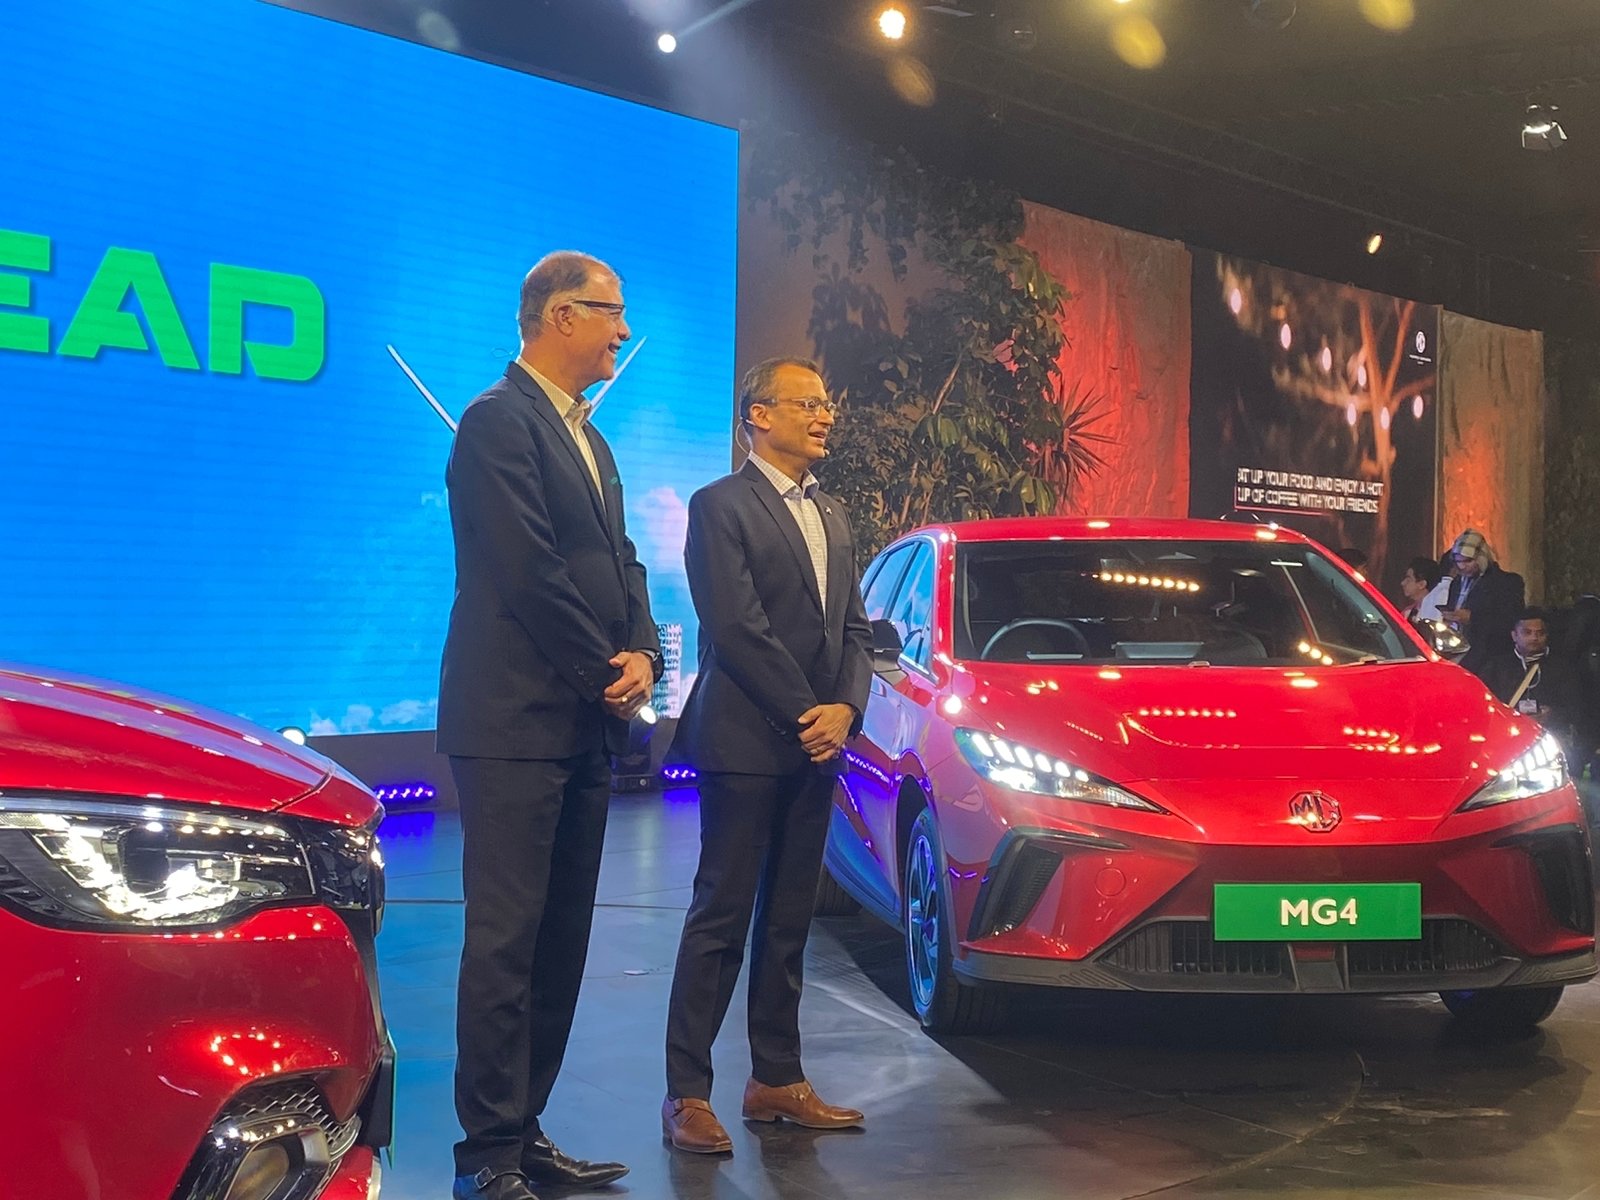 https://e-vehicleinfo.com/mg-showcased-mg4-electric-hatchback-at-auto-expo-2023/